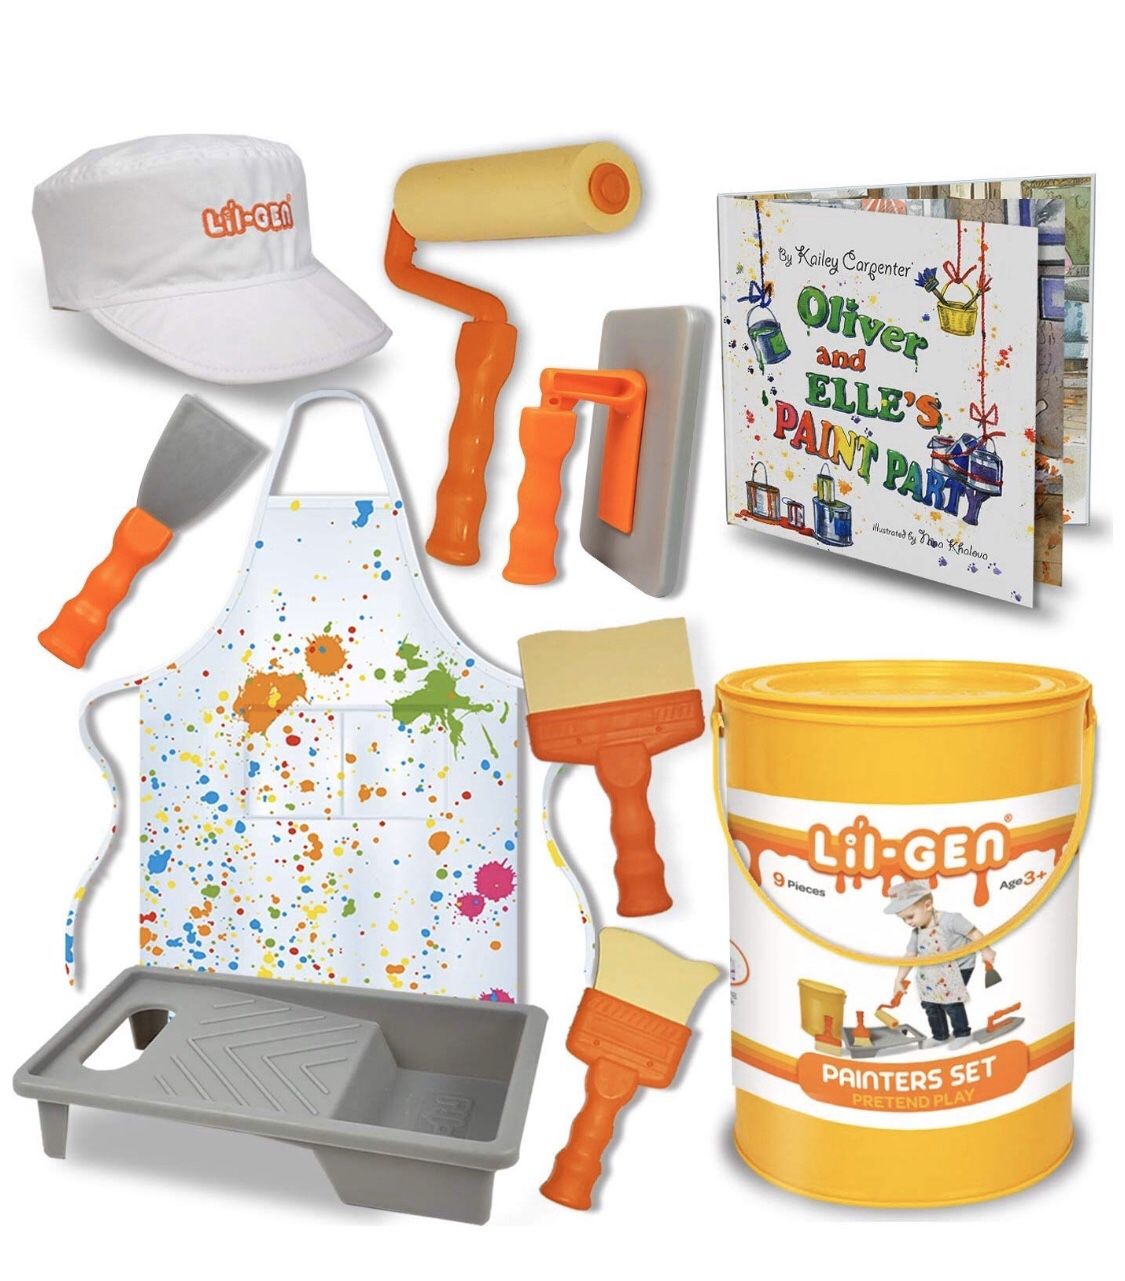 Gen Painter's Tool Set Plus Book - Pretend Play Toddler Toys for Kids Age 2-4, Includes Cap, Apron, 7 Painter Tools and Storage Paint Bucket